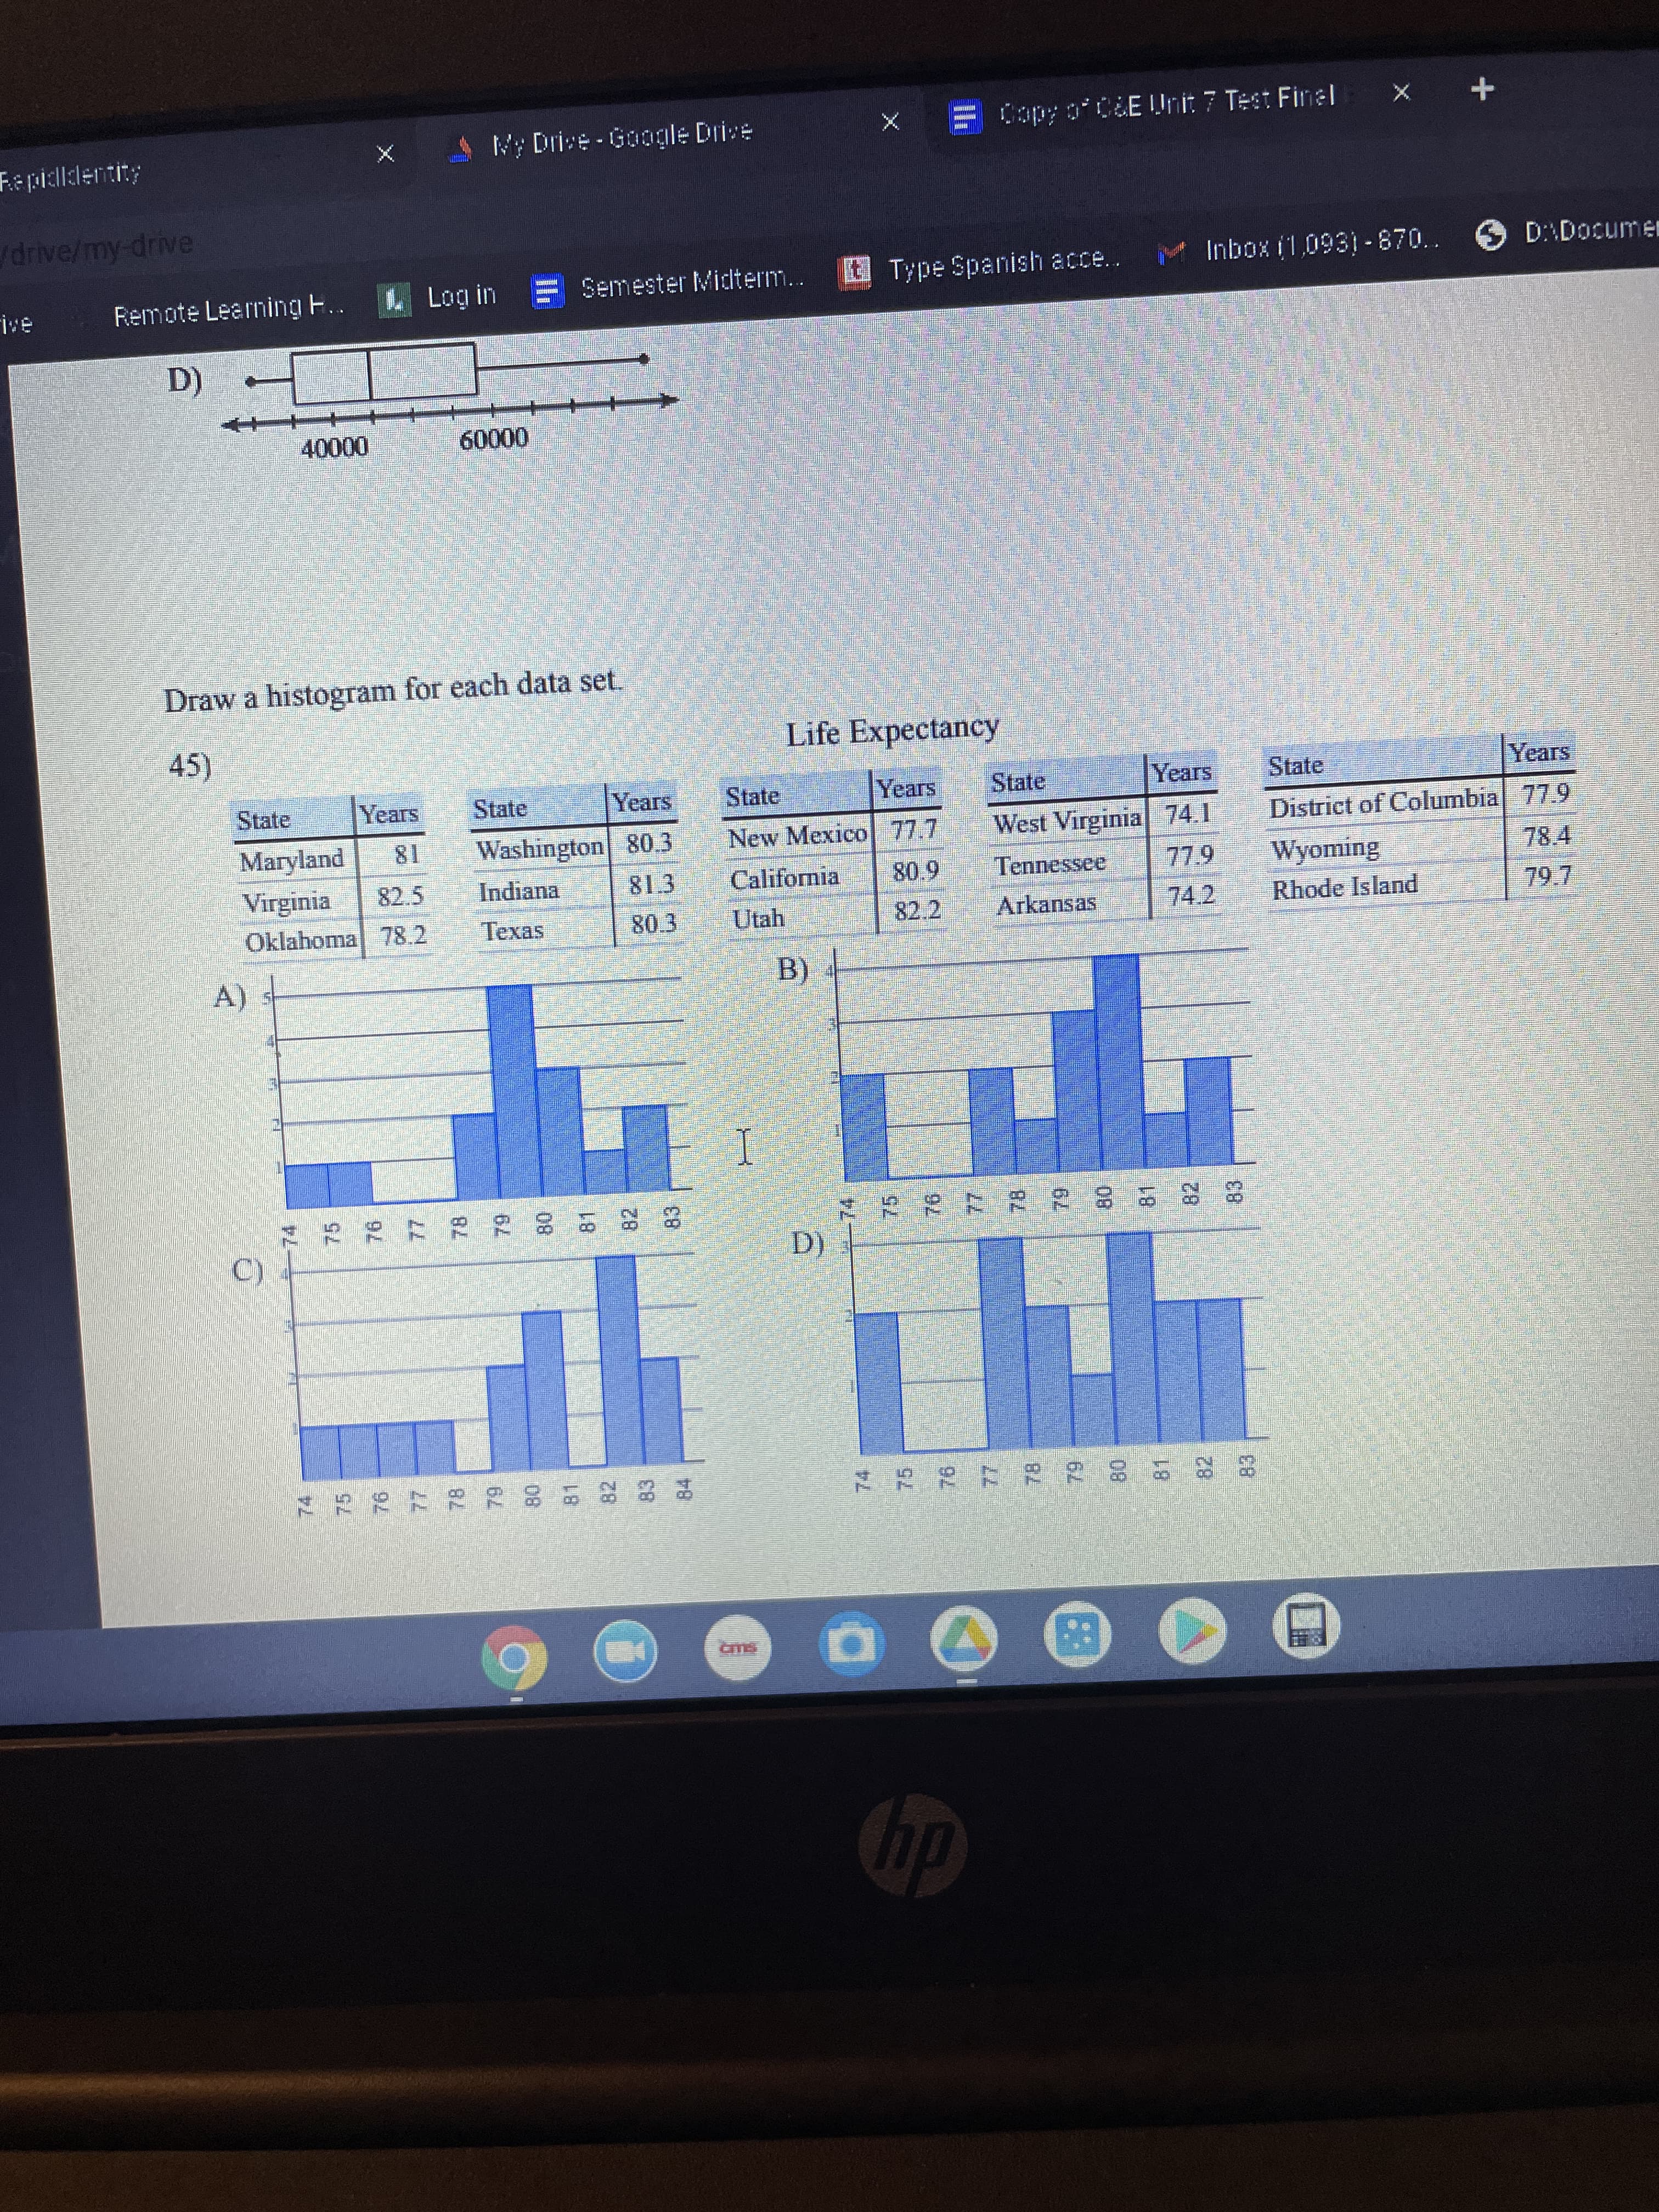 Draw a histogram for each data set.
